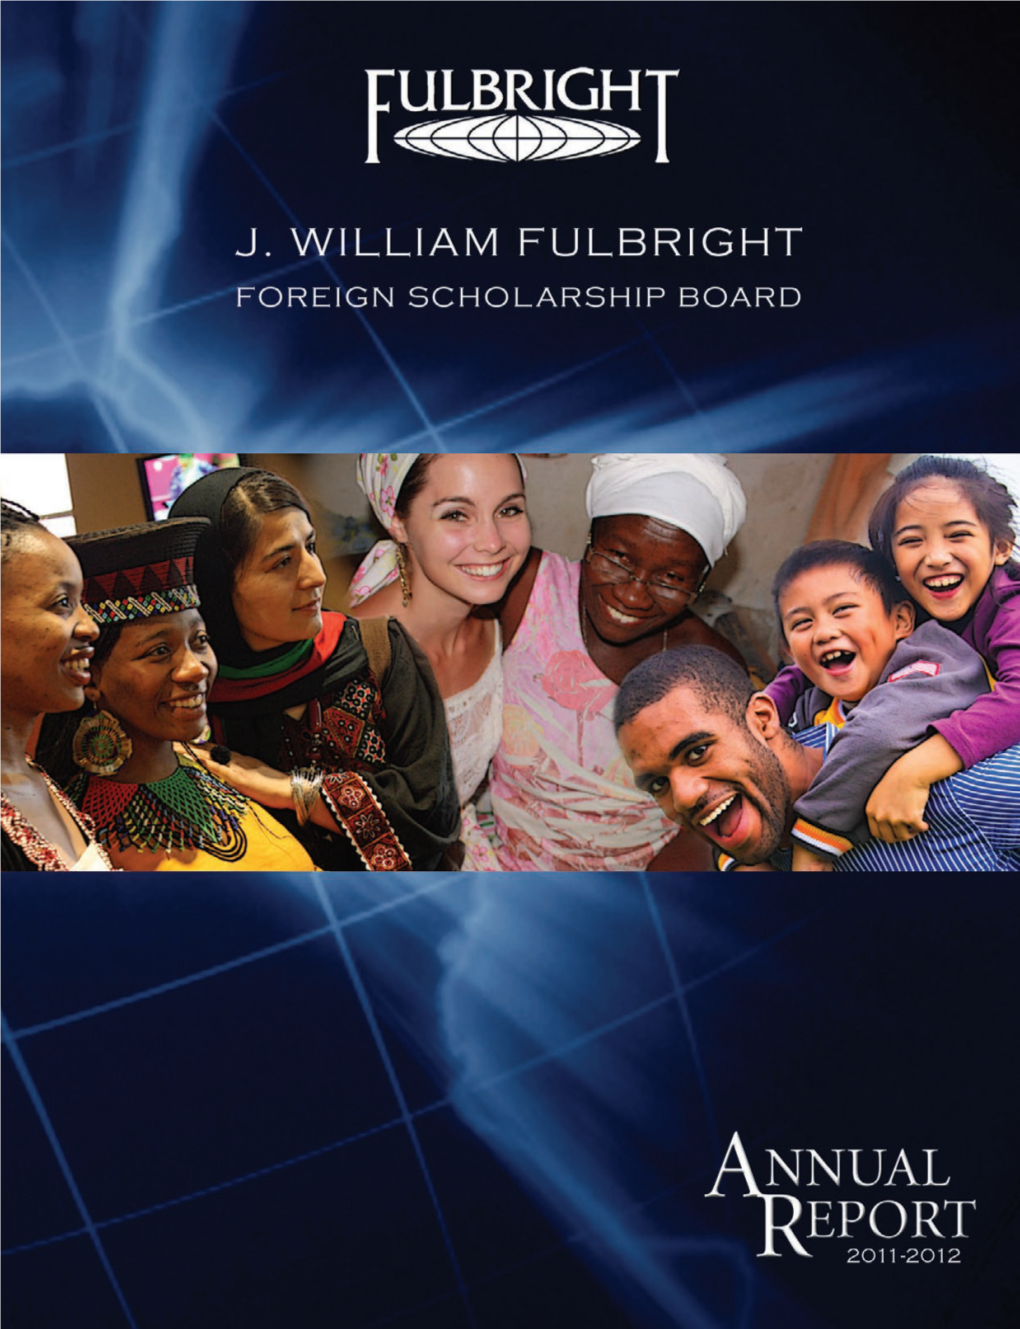 About the Fulbright Program